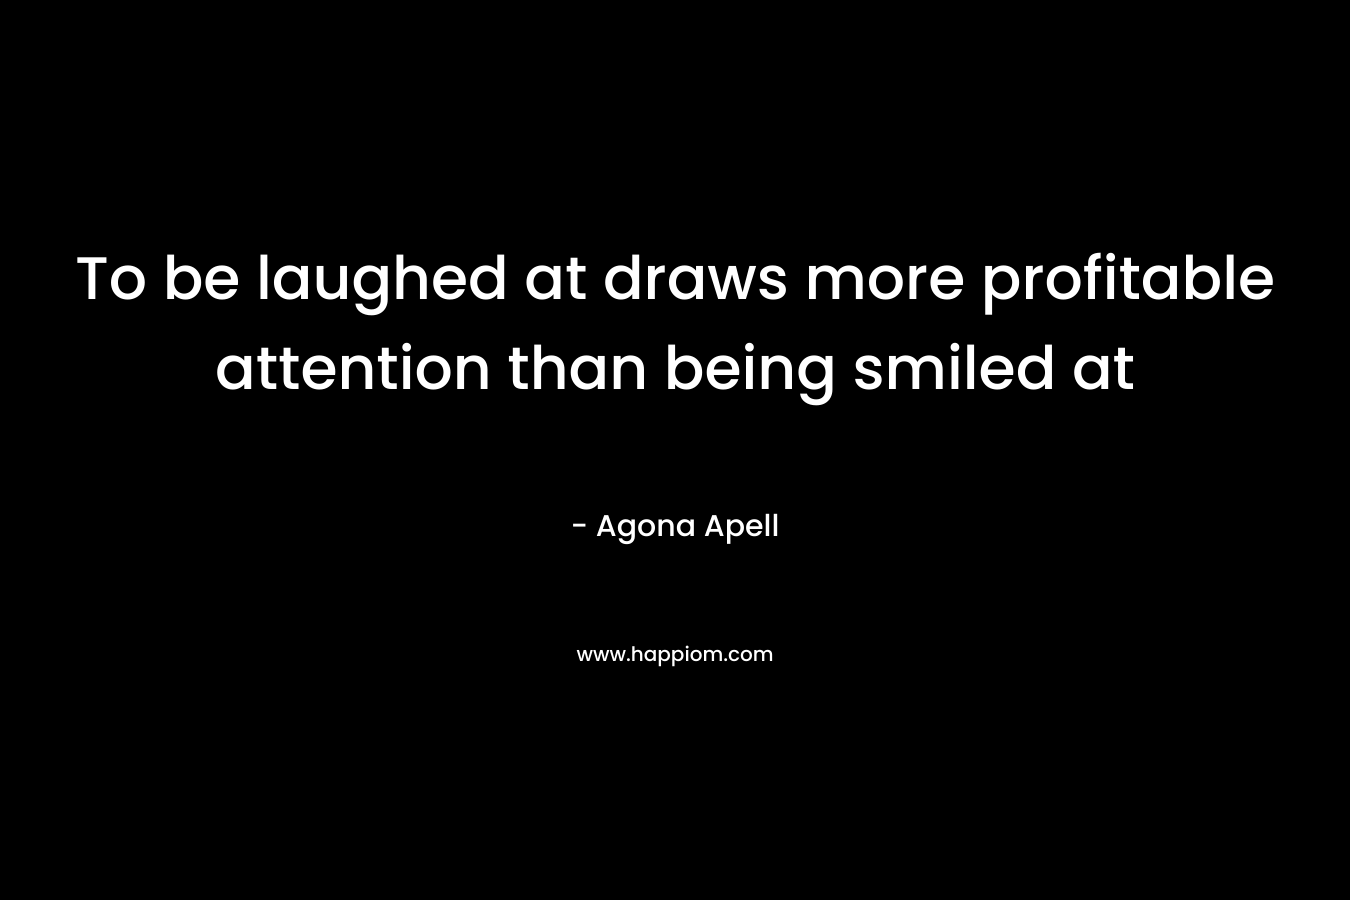 To be laughed at draws more profitable attention than being smiled at